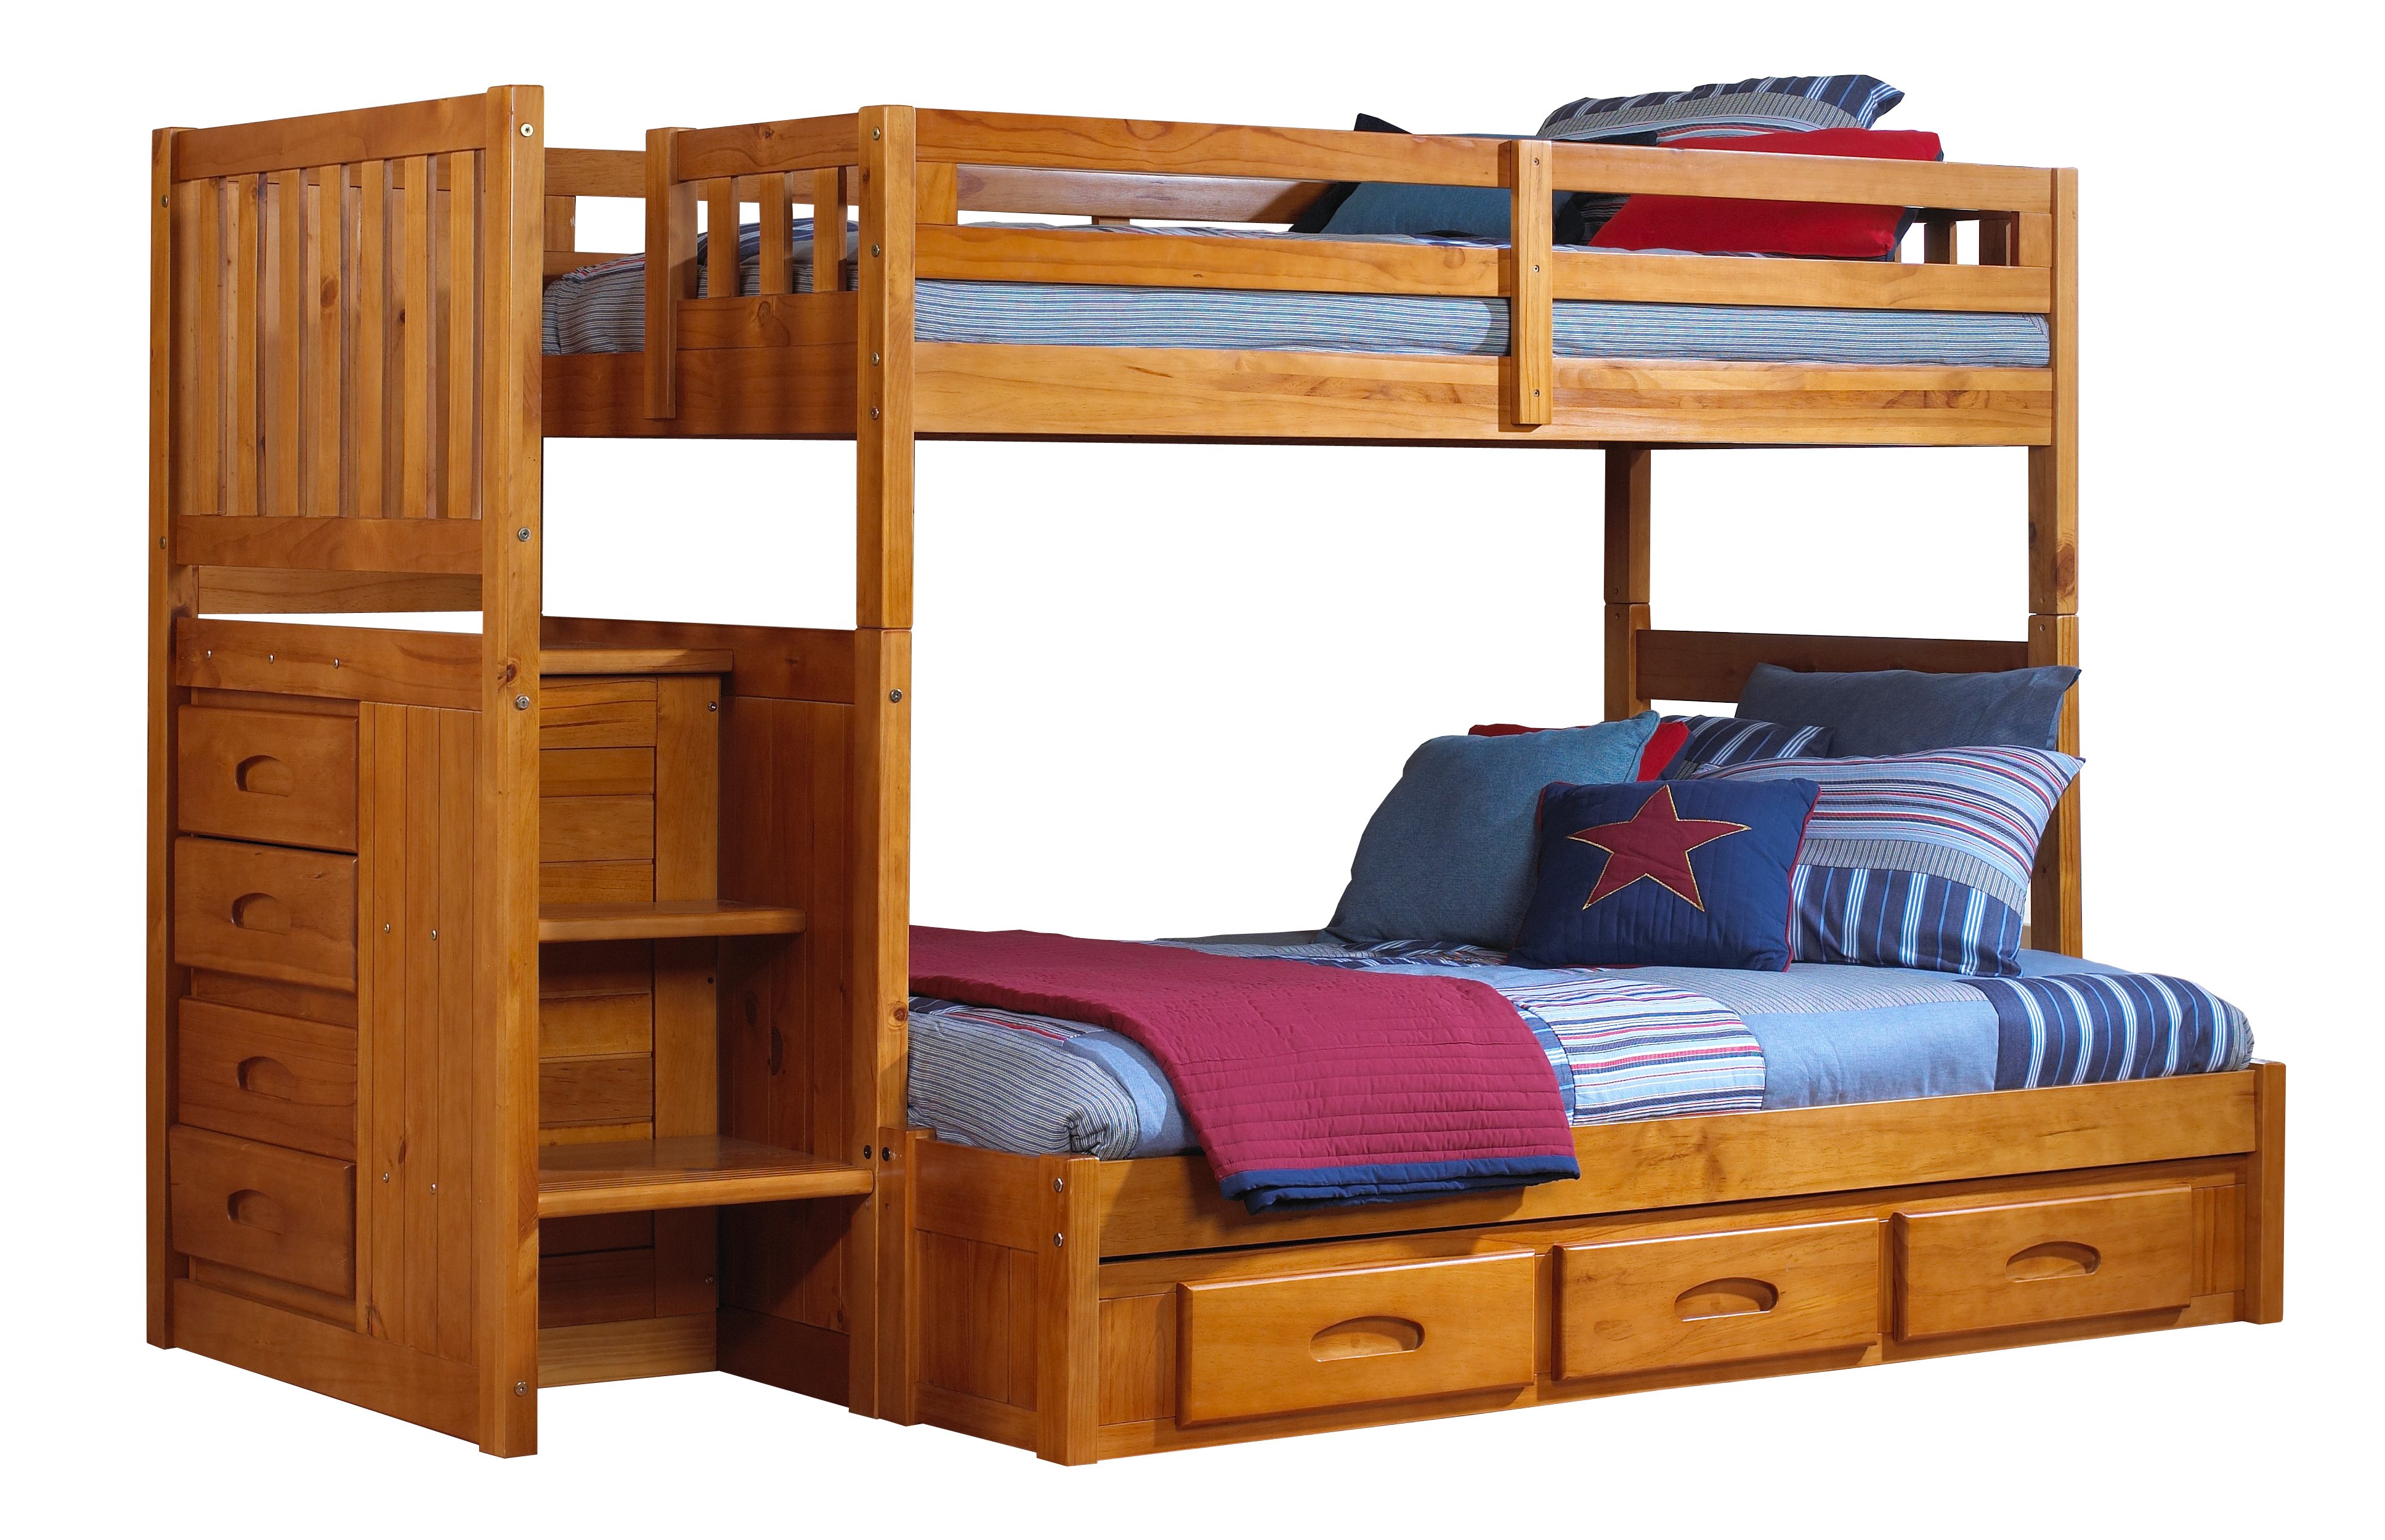 Honey Staircase Bunk Bed, Images Of Bunk Beds With Stairs